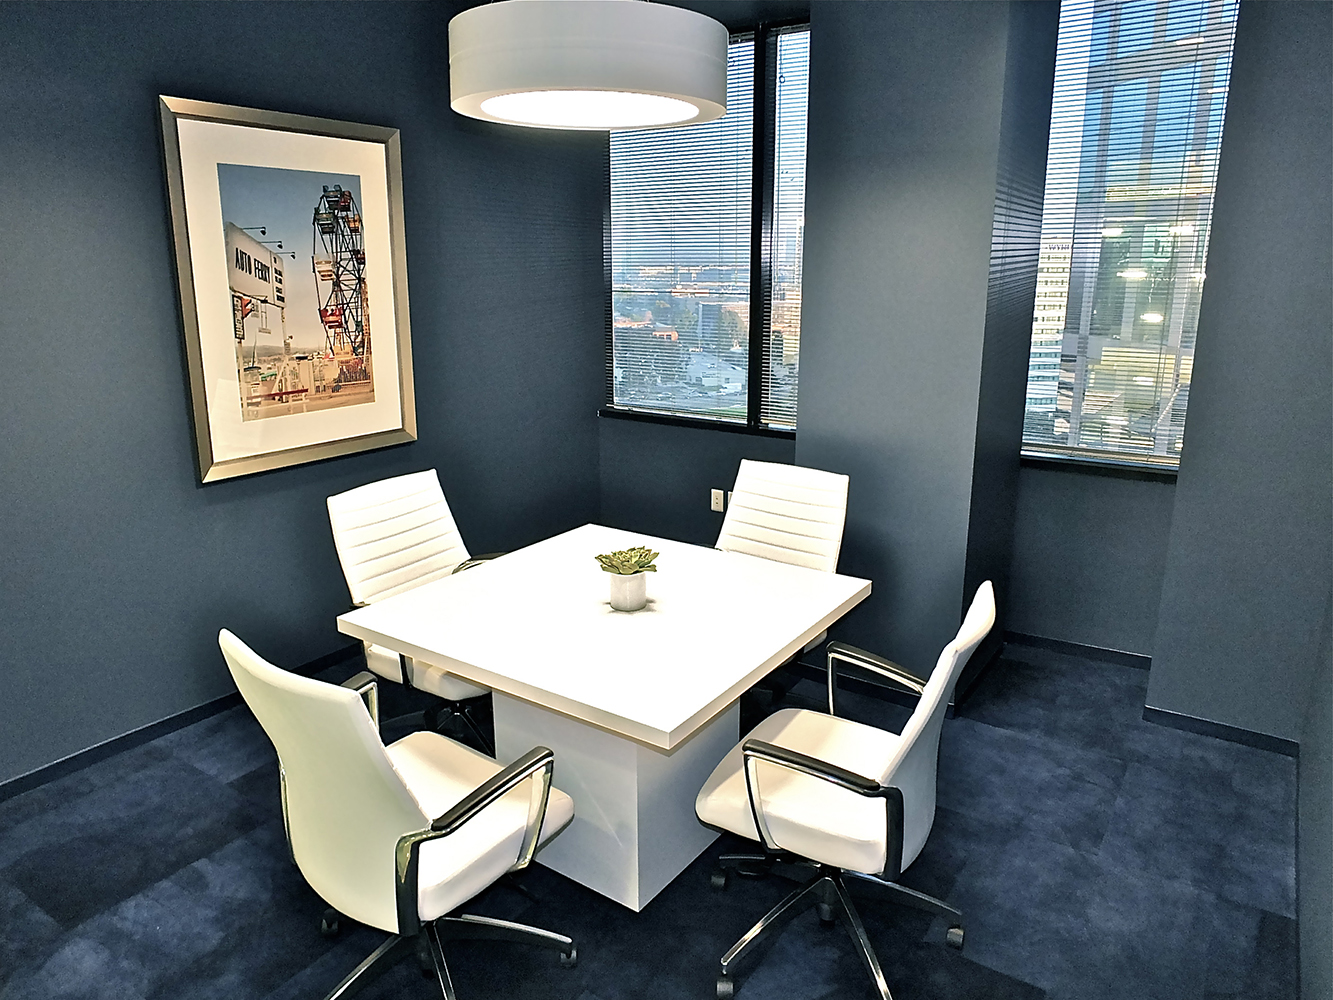 An Omnience pendant in an office lighting application above a small meeting table in a blue-carpeted meeting room.